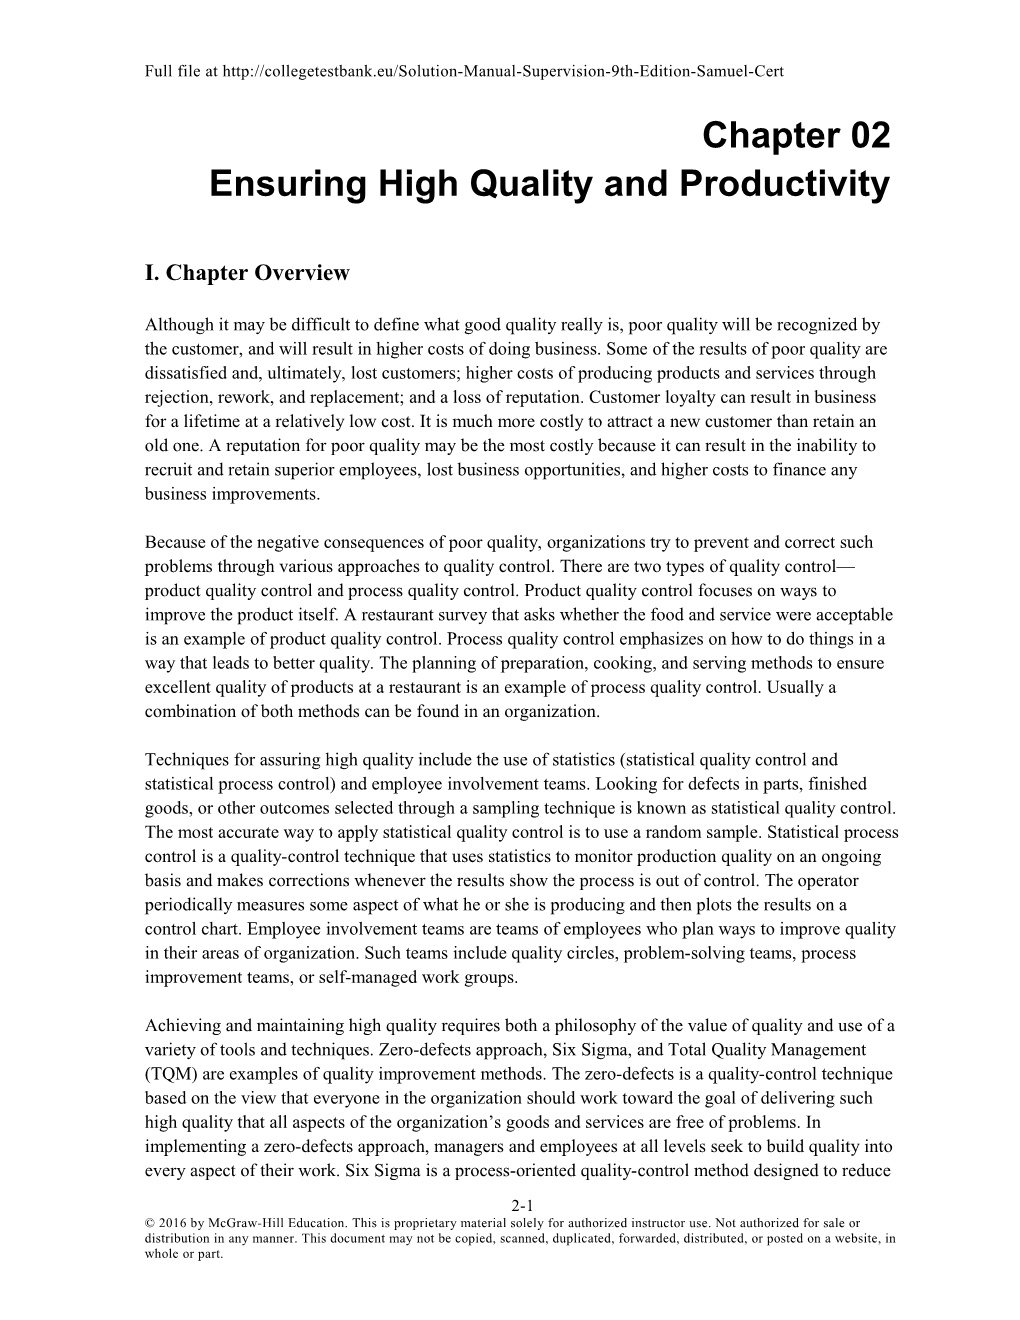 Ensuring High Quality and Productivity